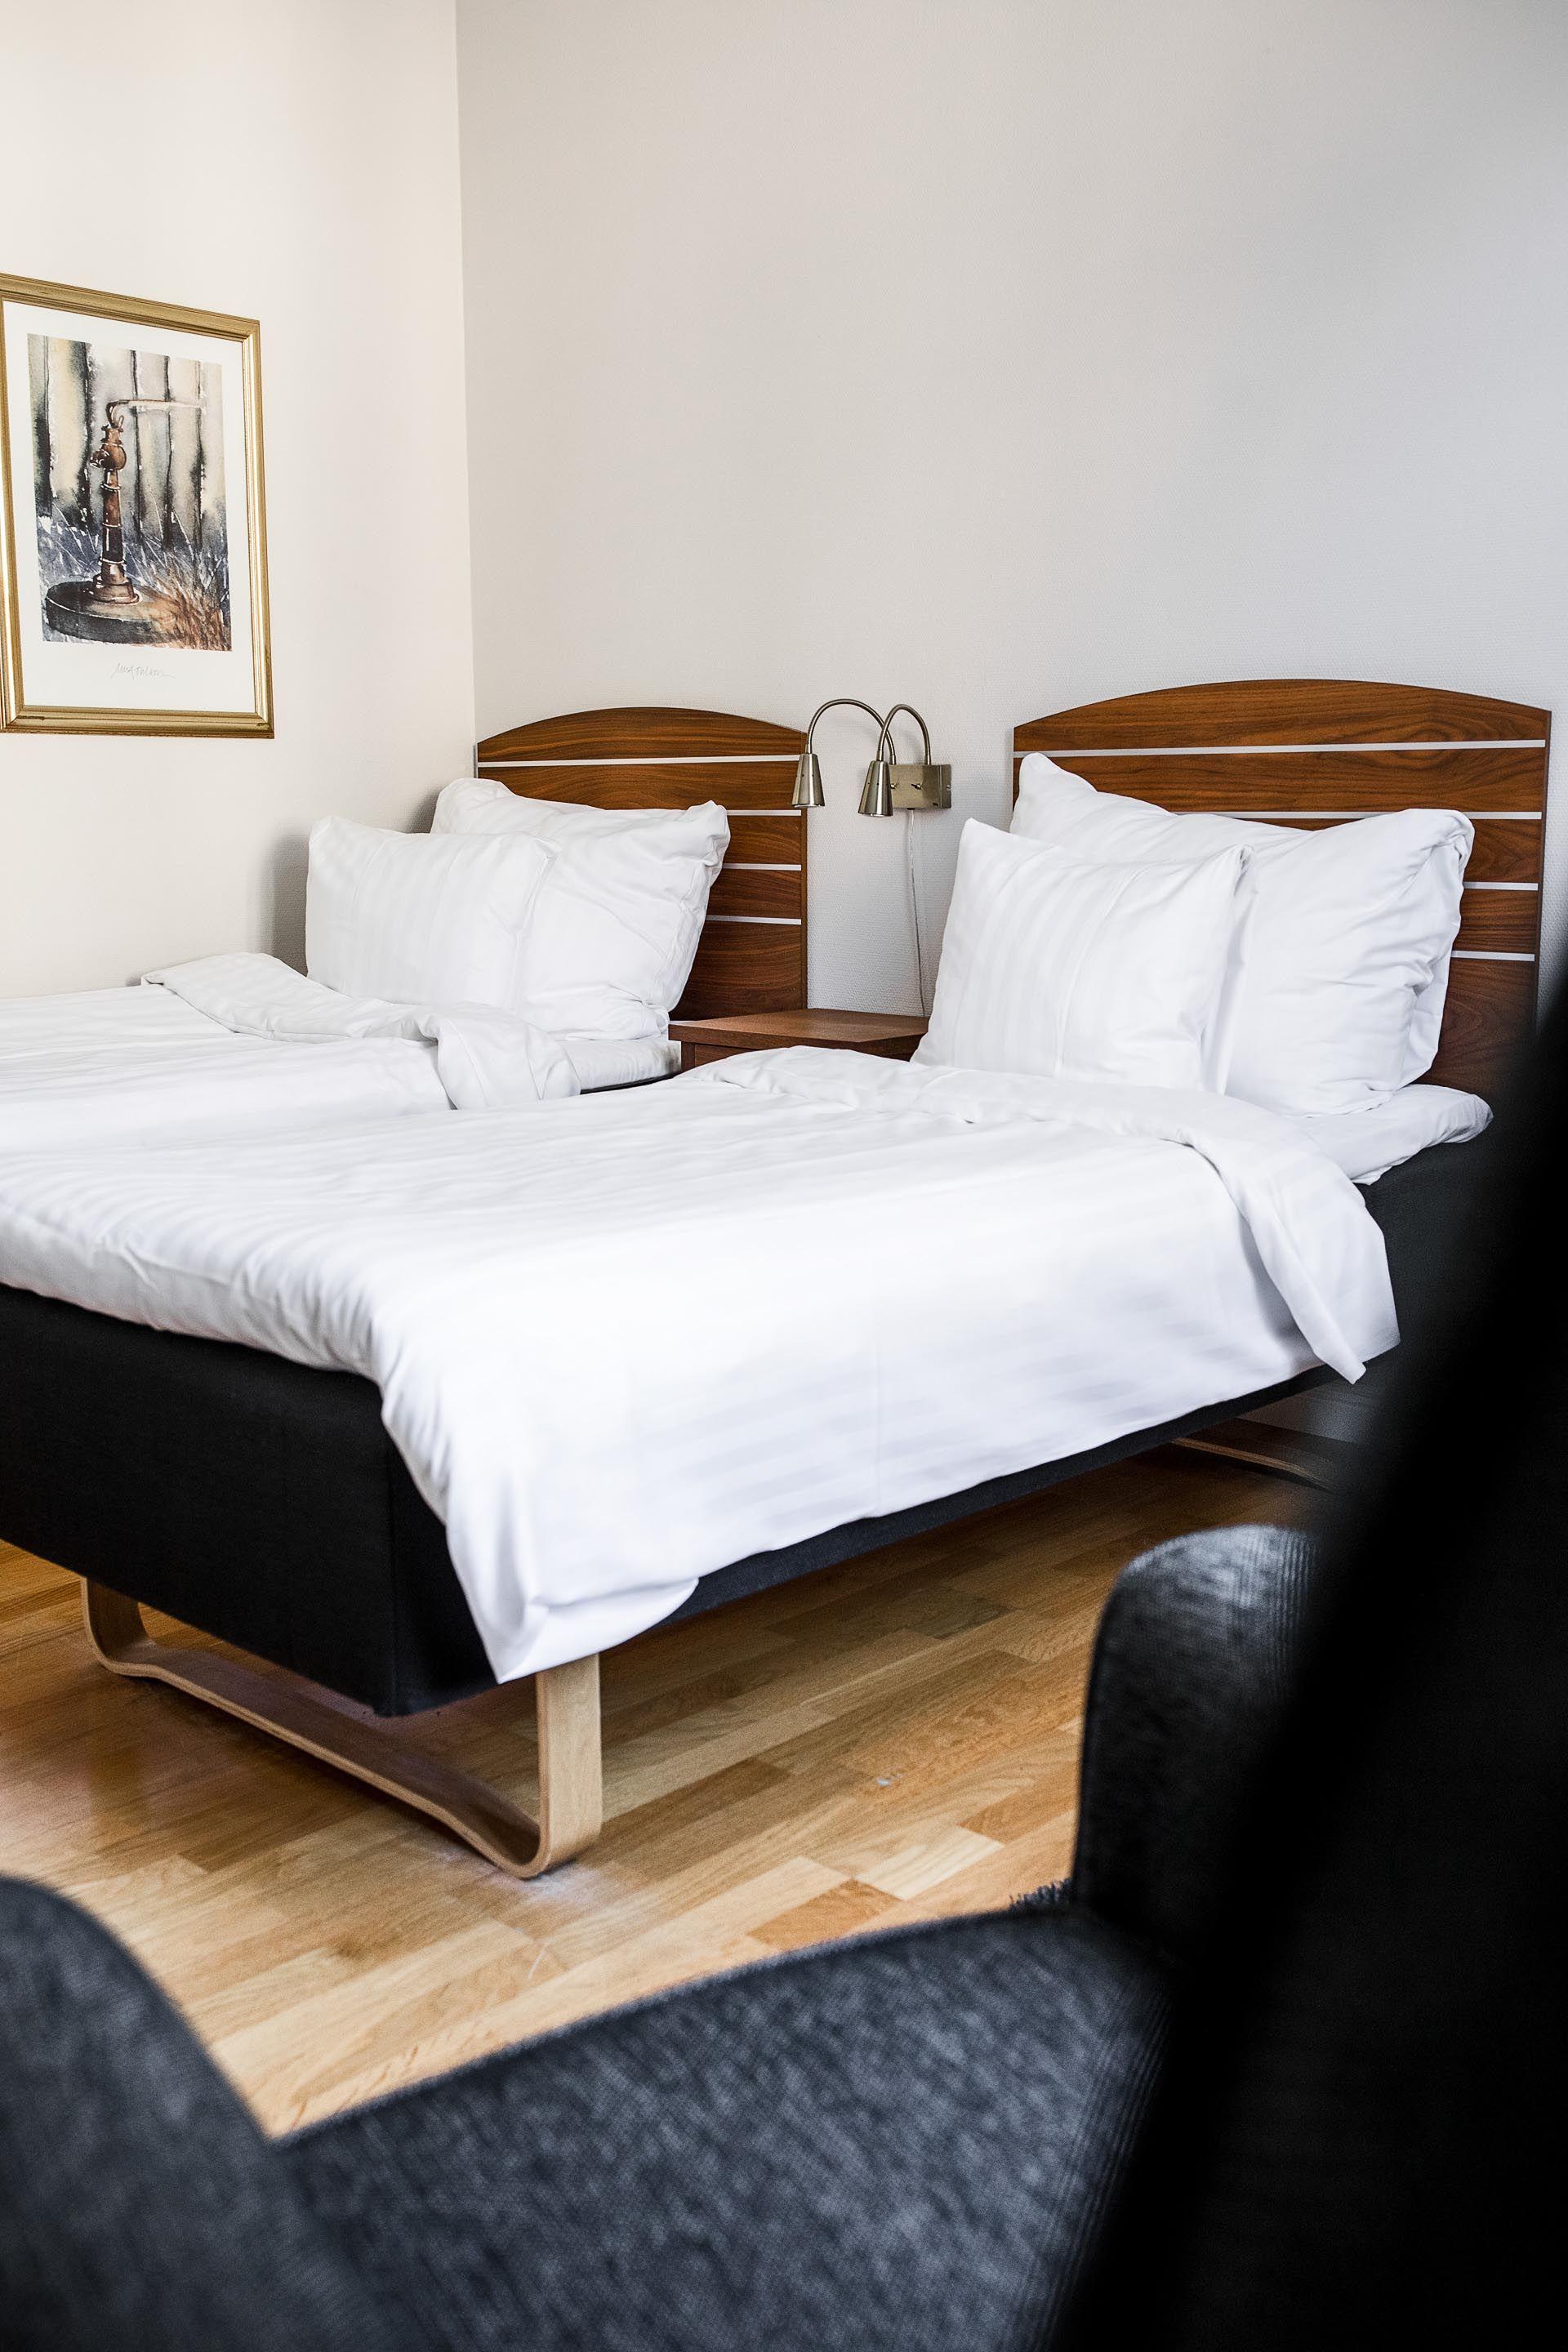 Standard twinroom- two separate beds - 90 cm each, bathroom with toilet and shower, hair dryer, TV, office desk with chair, telephone and desk light, coat rack, mirror, free wifi